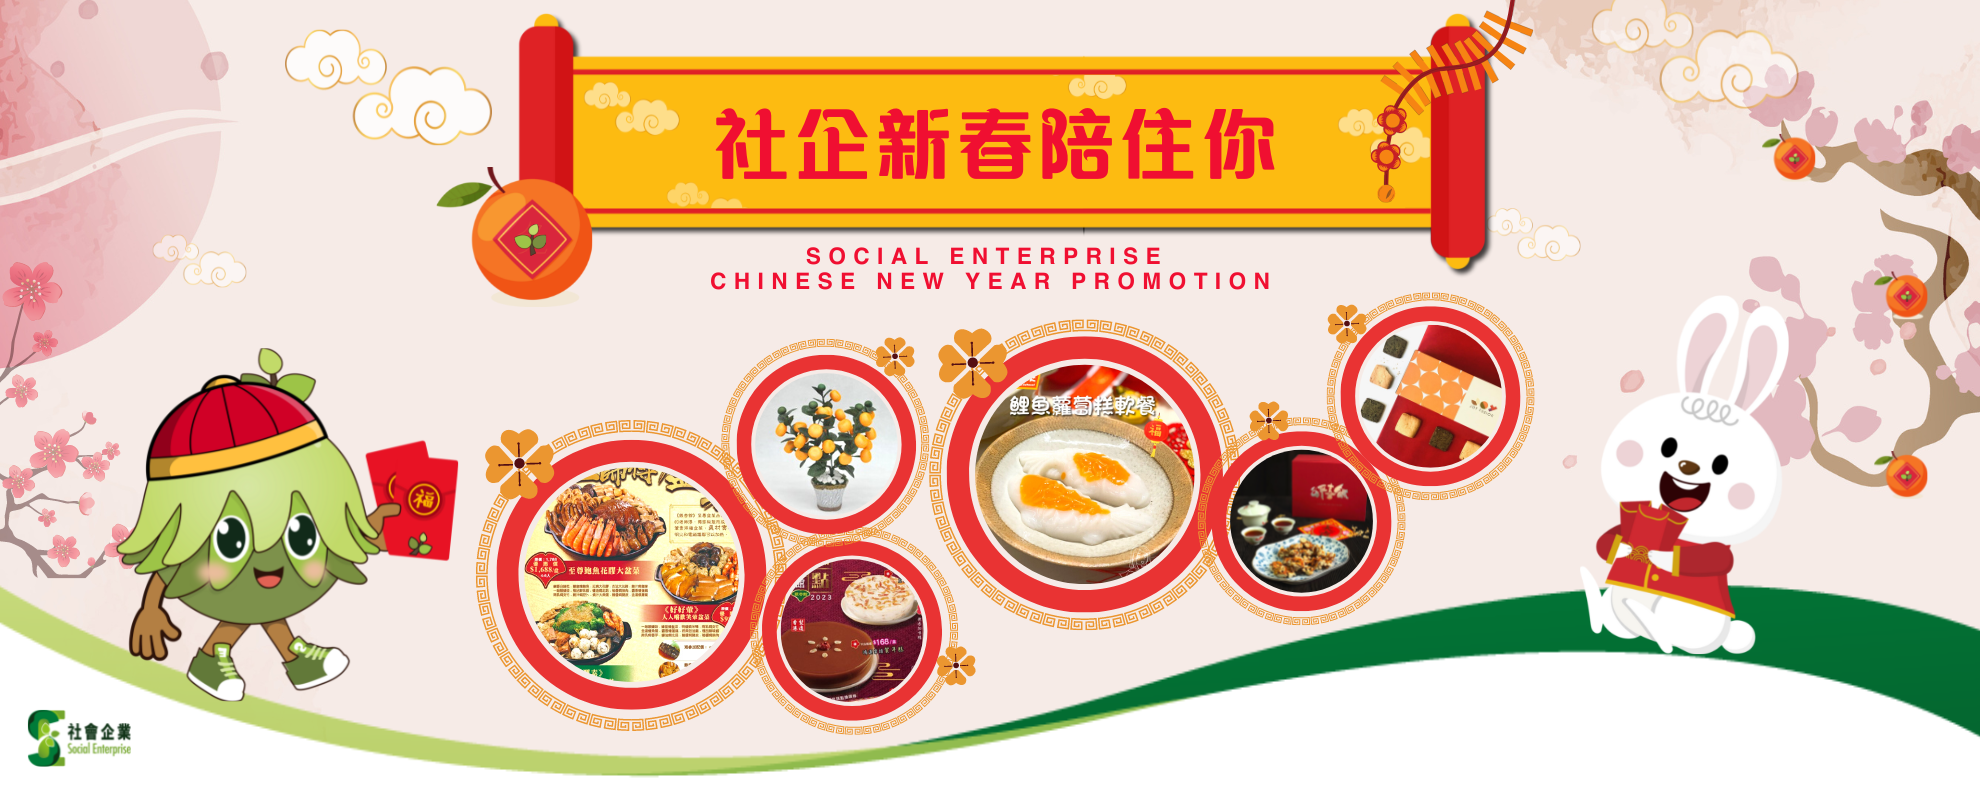 Social Enterprise Chinese New Year and Valentine's Day Promotion